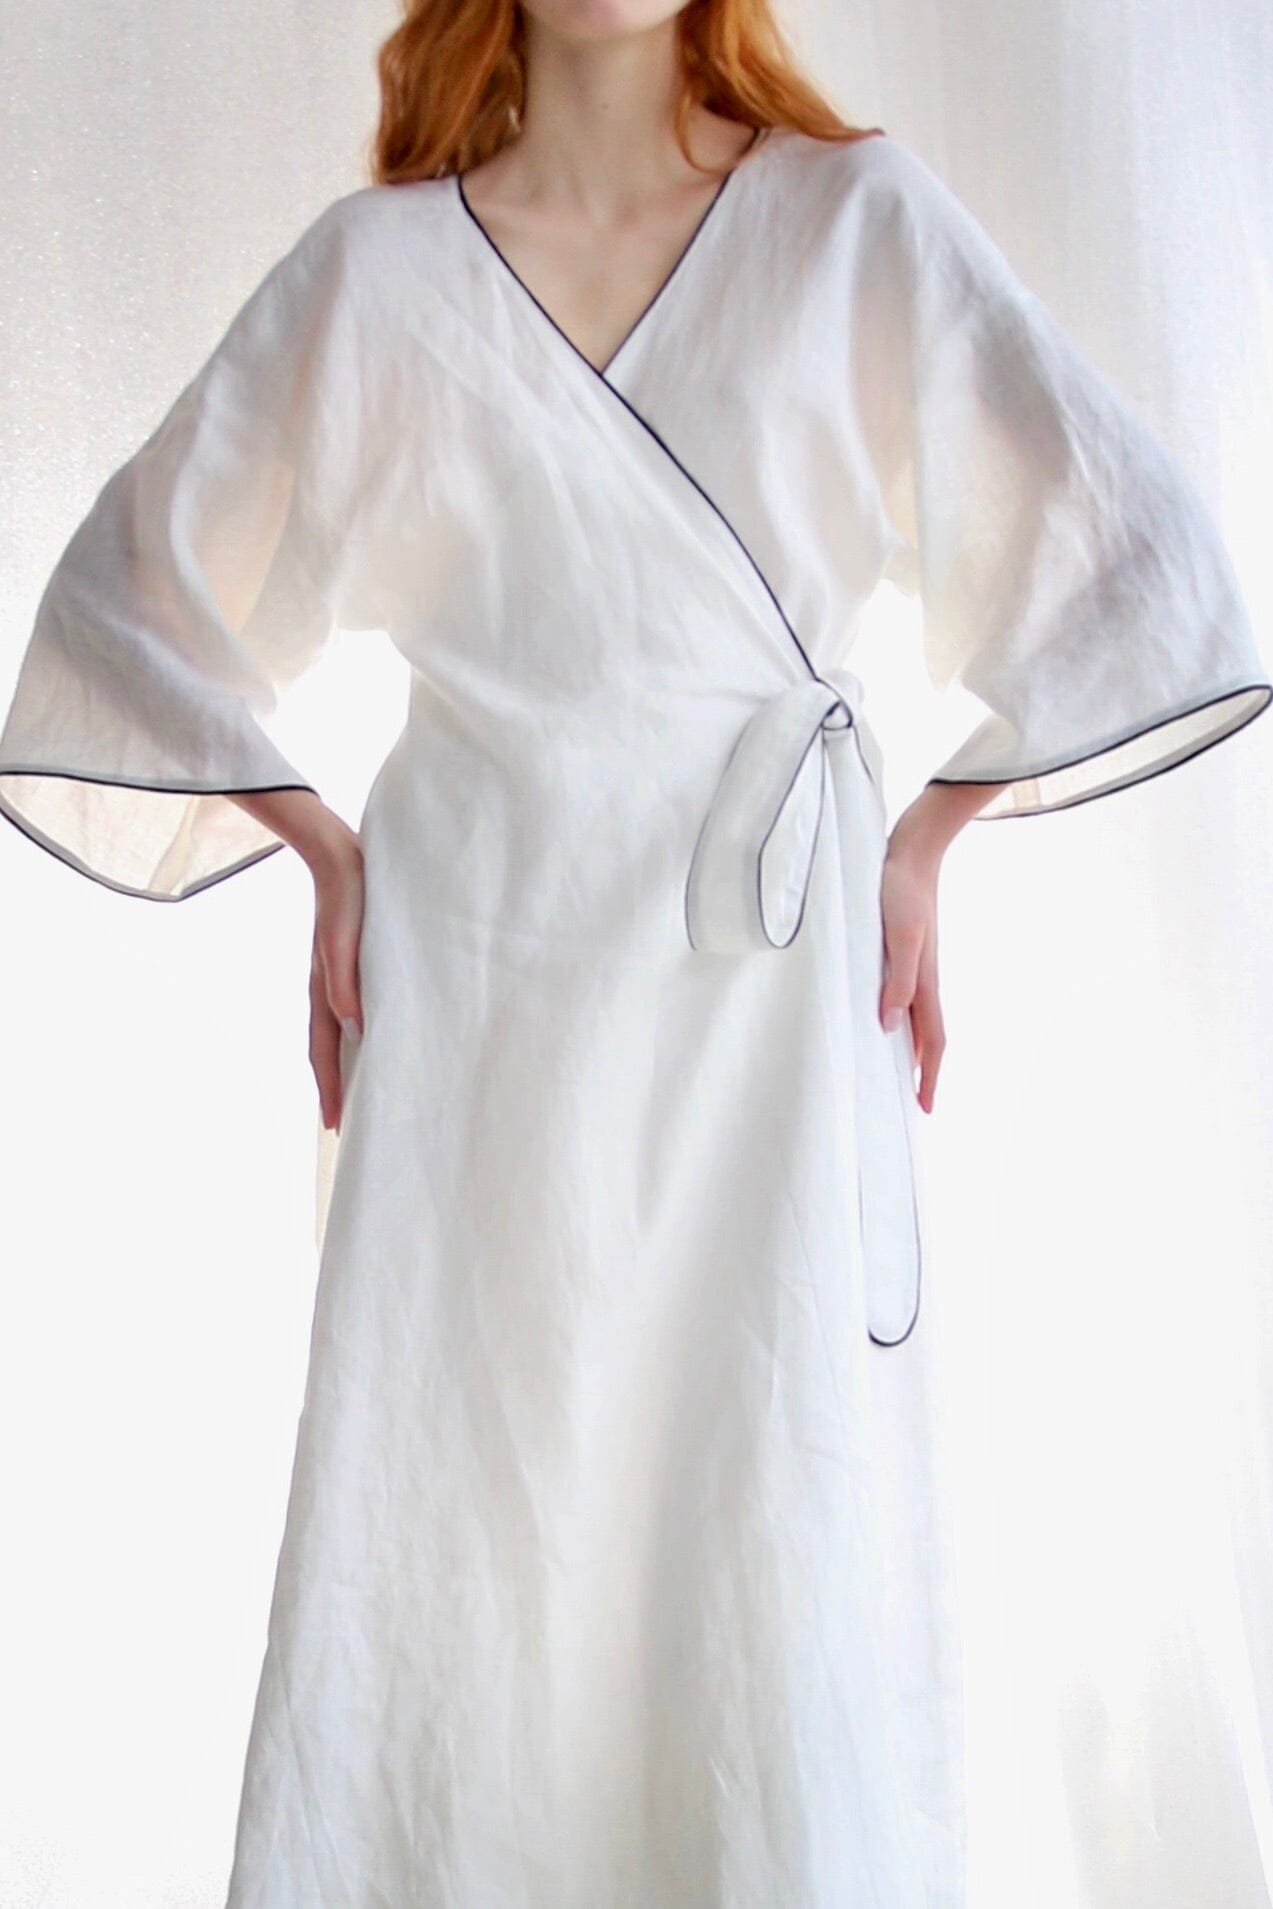  White Linen Wrap Dress With Black Details Product Amoralle